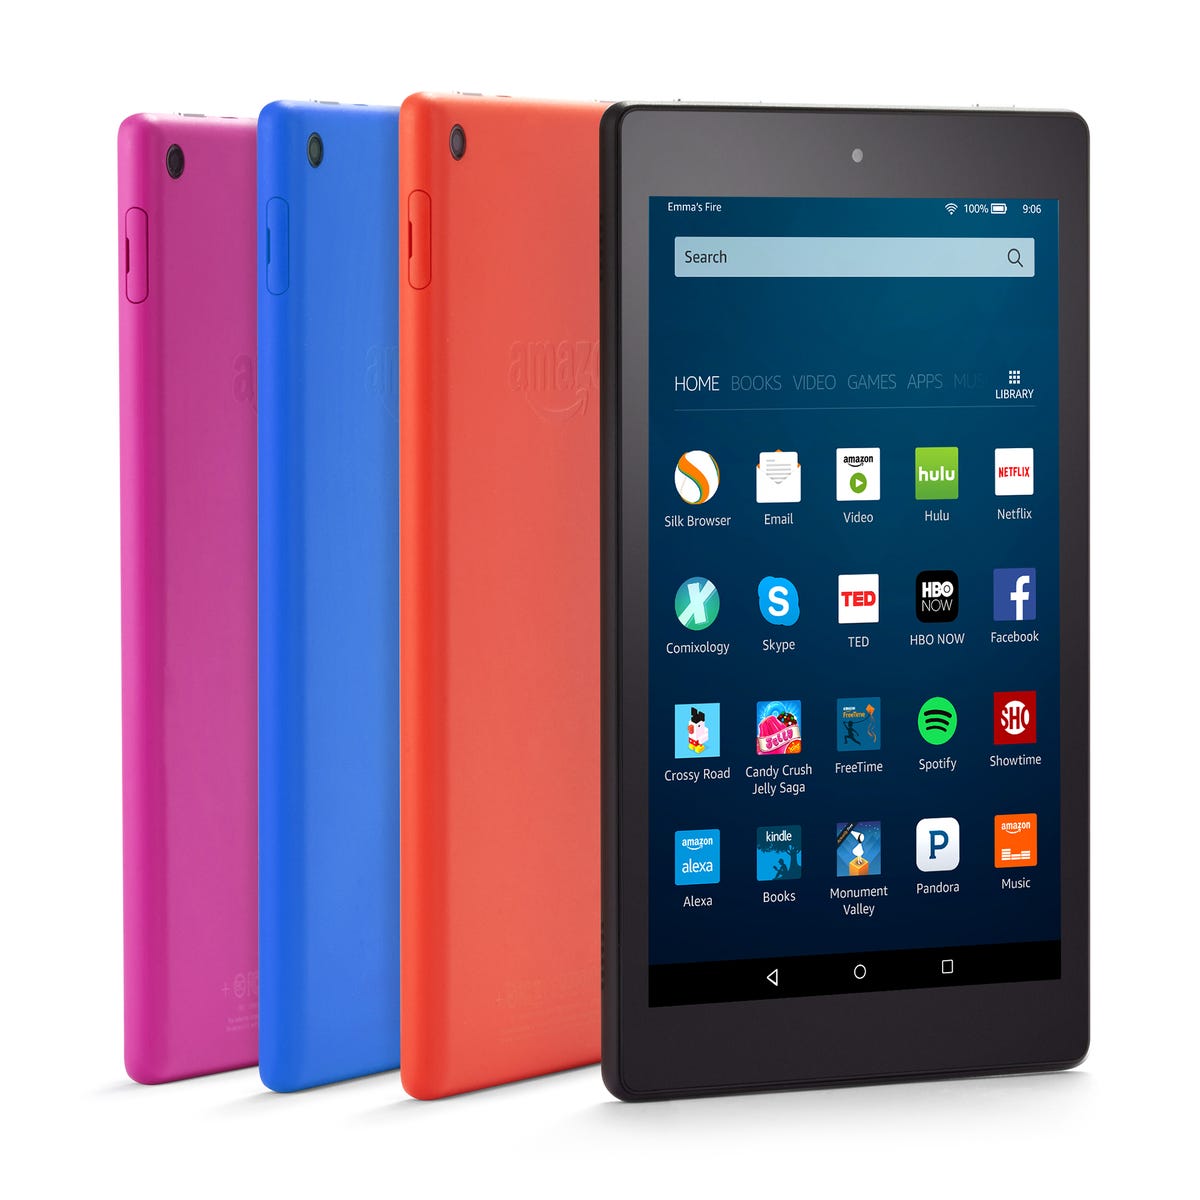 Fire HD 8 (2016) review: A cheap tablet that's actually good - CNET